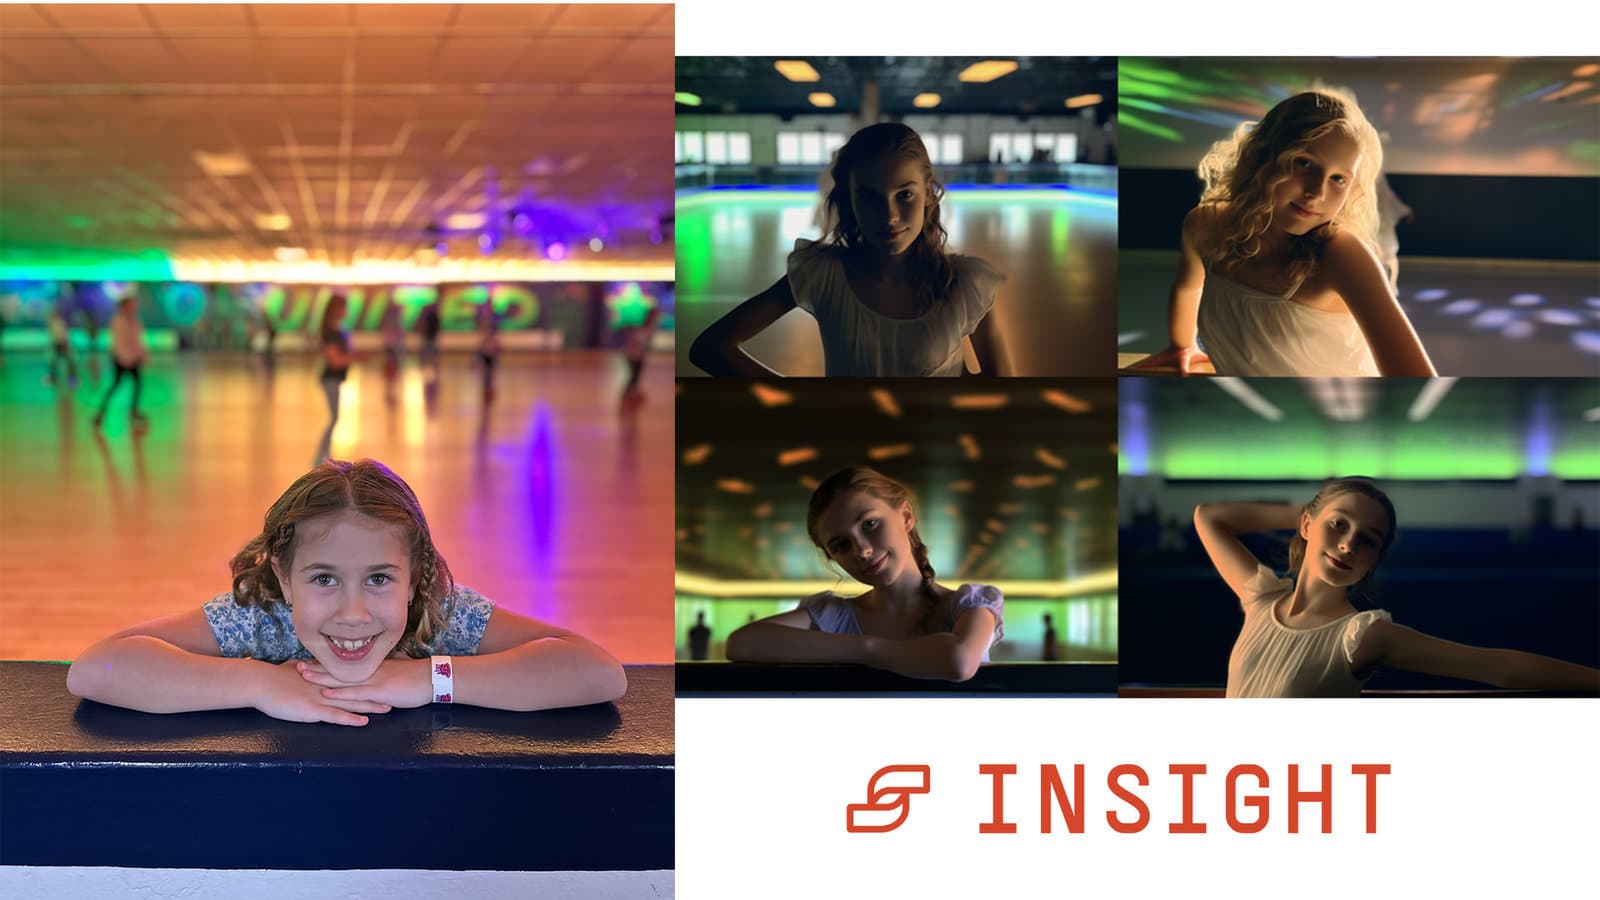 Collage of girl enjoying roller skating rink at different angles